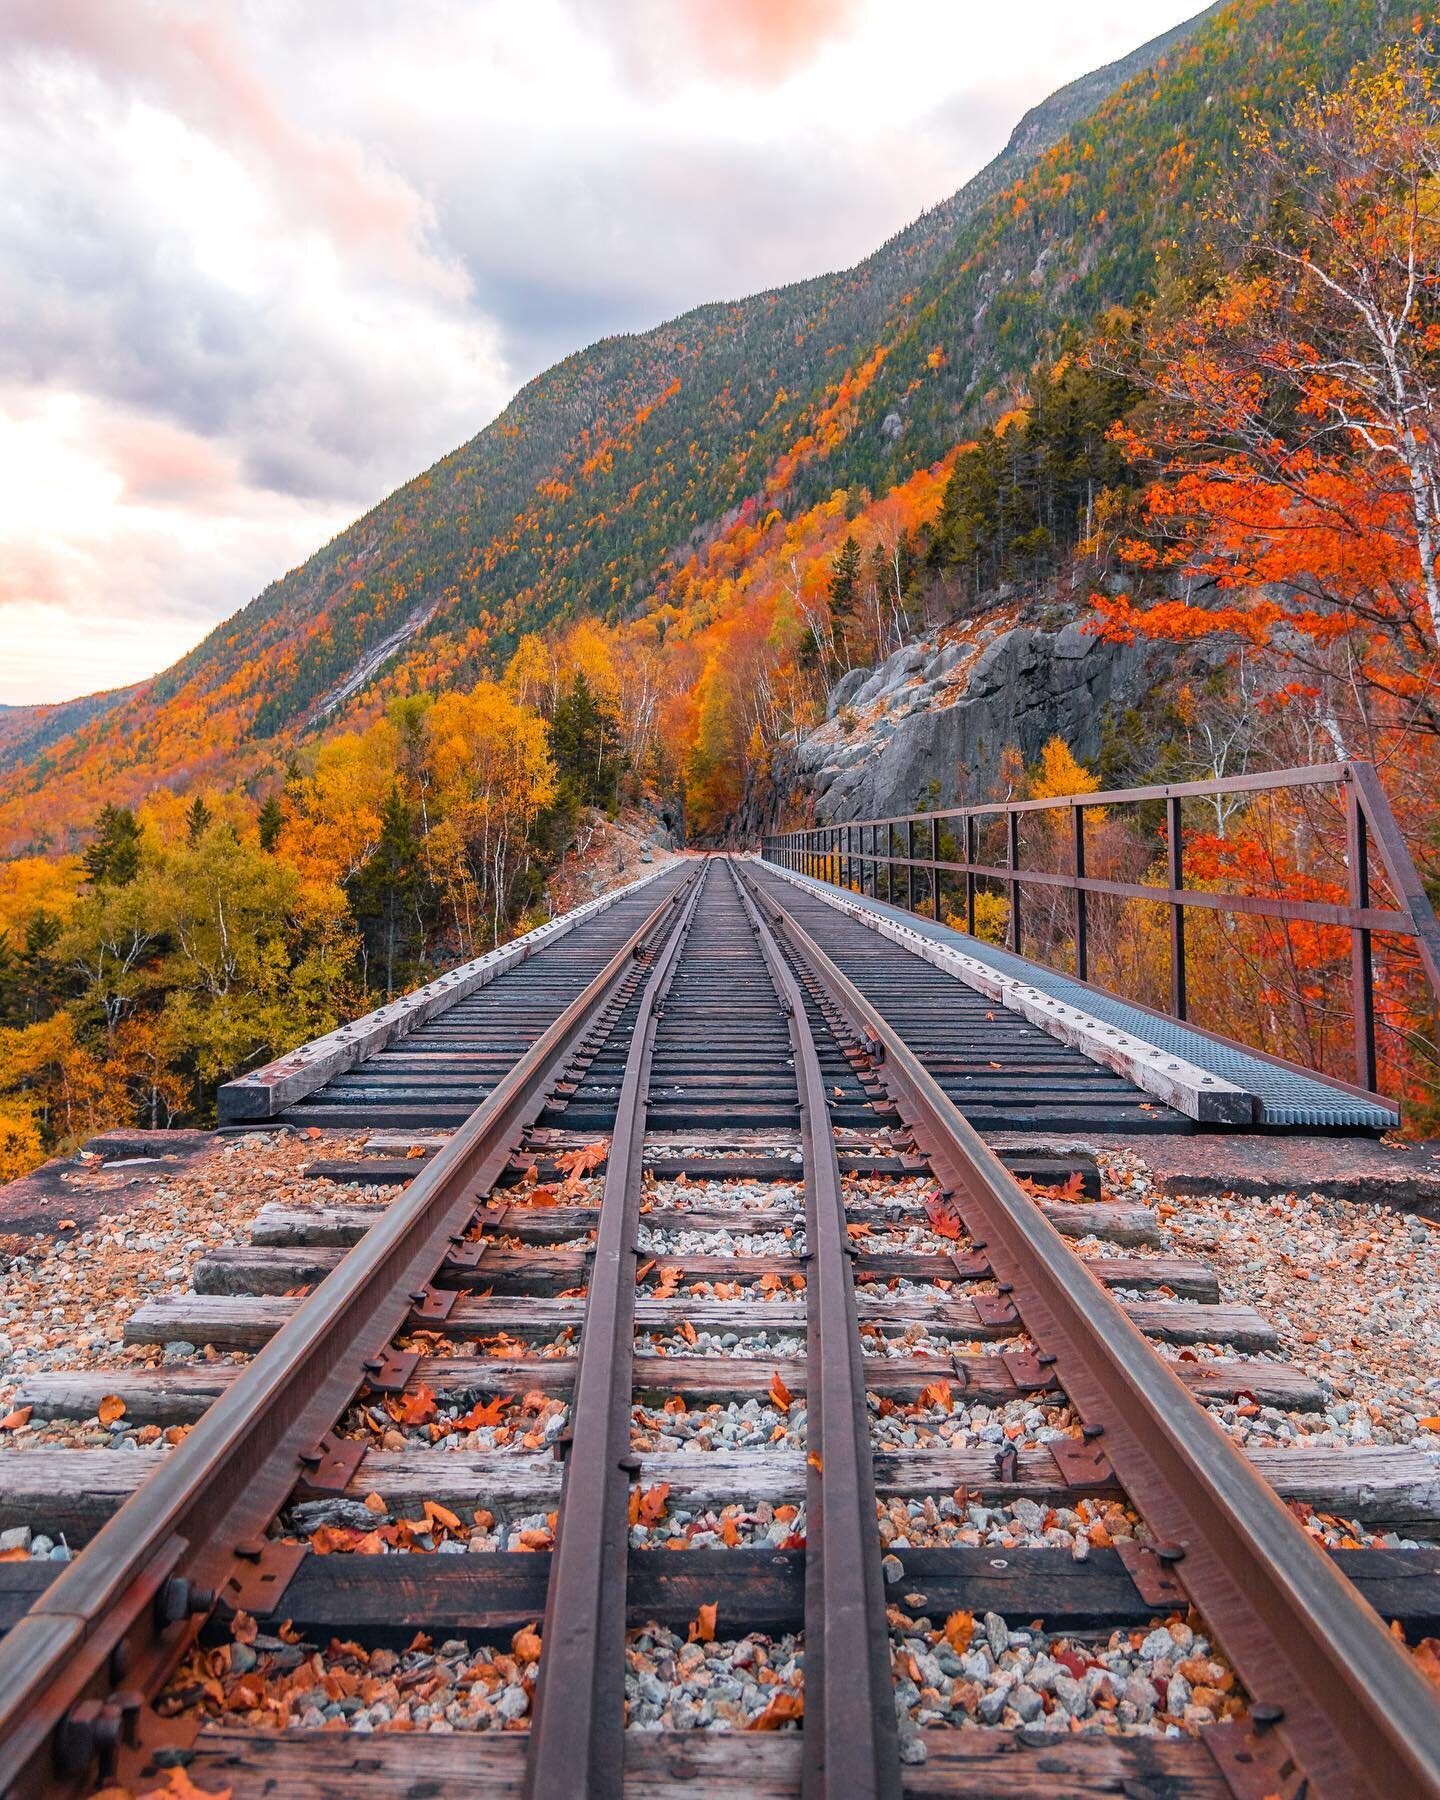 Crawford Notch tracks 🍁

In the last few years, I had been eyeing this cool train bridge in Crawford Notch, New Hampshire. When I was up in New Hampshire this fall, I finally got to visit this spot and it was beautiful! Unfortunately, I wasn&rsquo;t